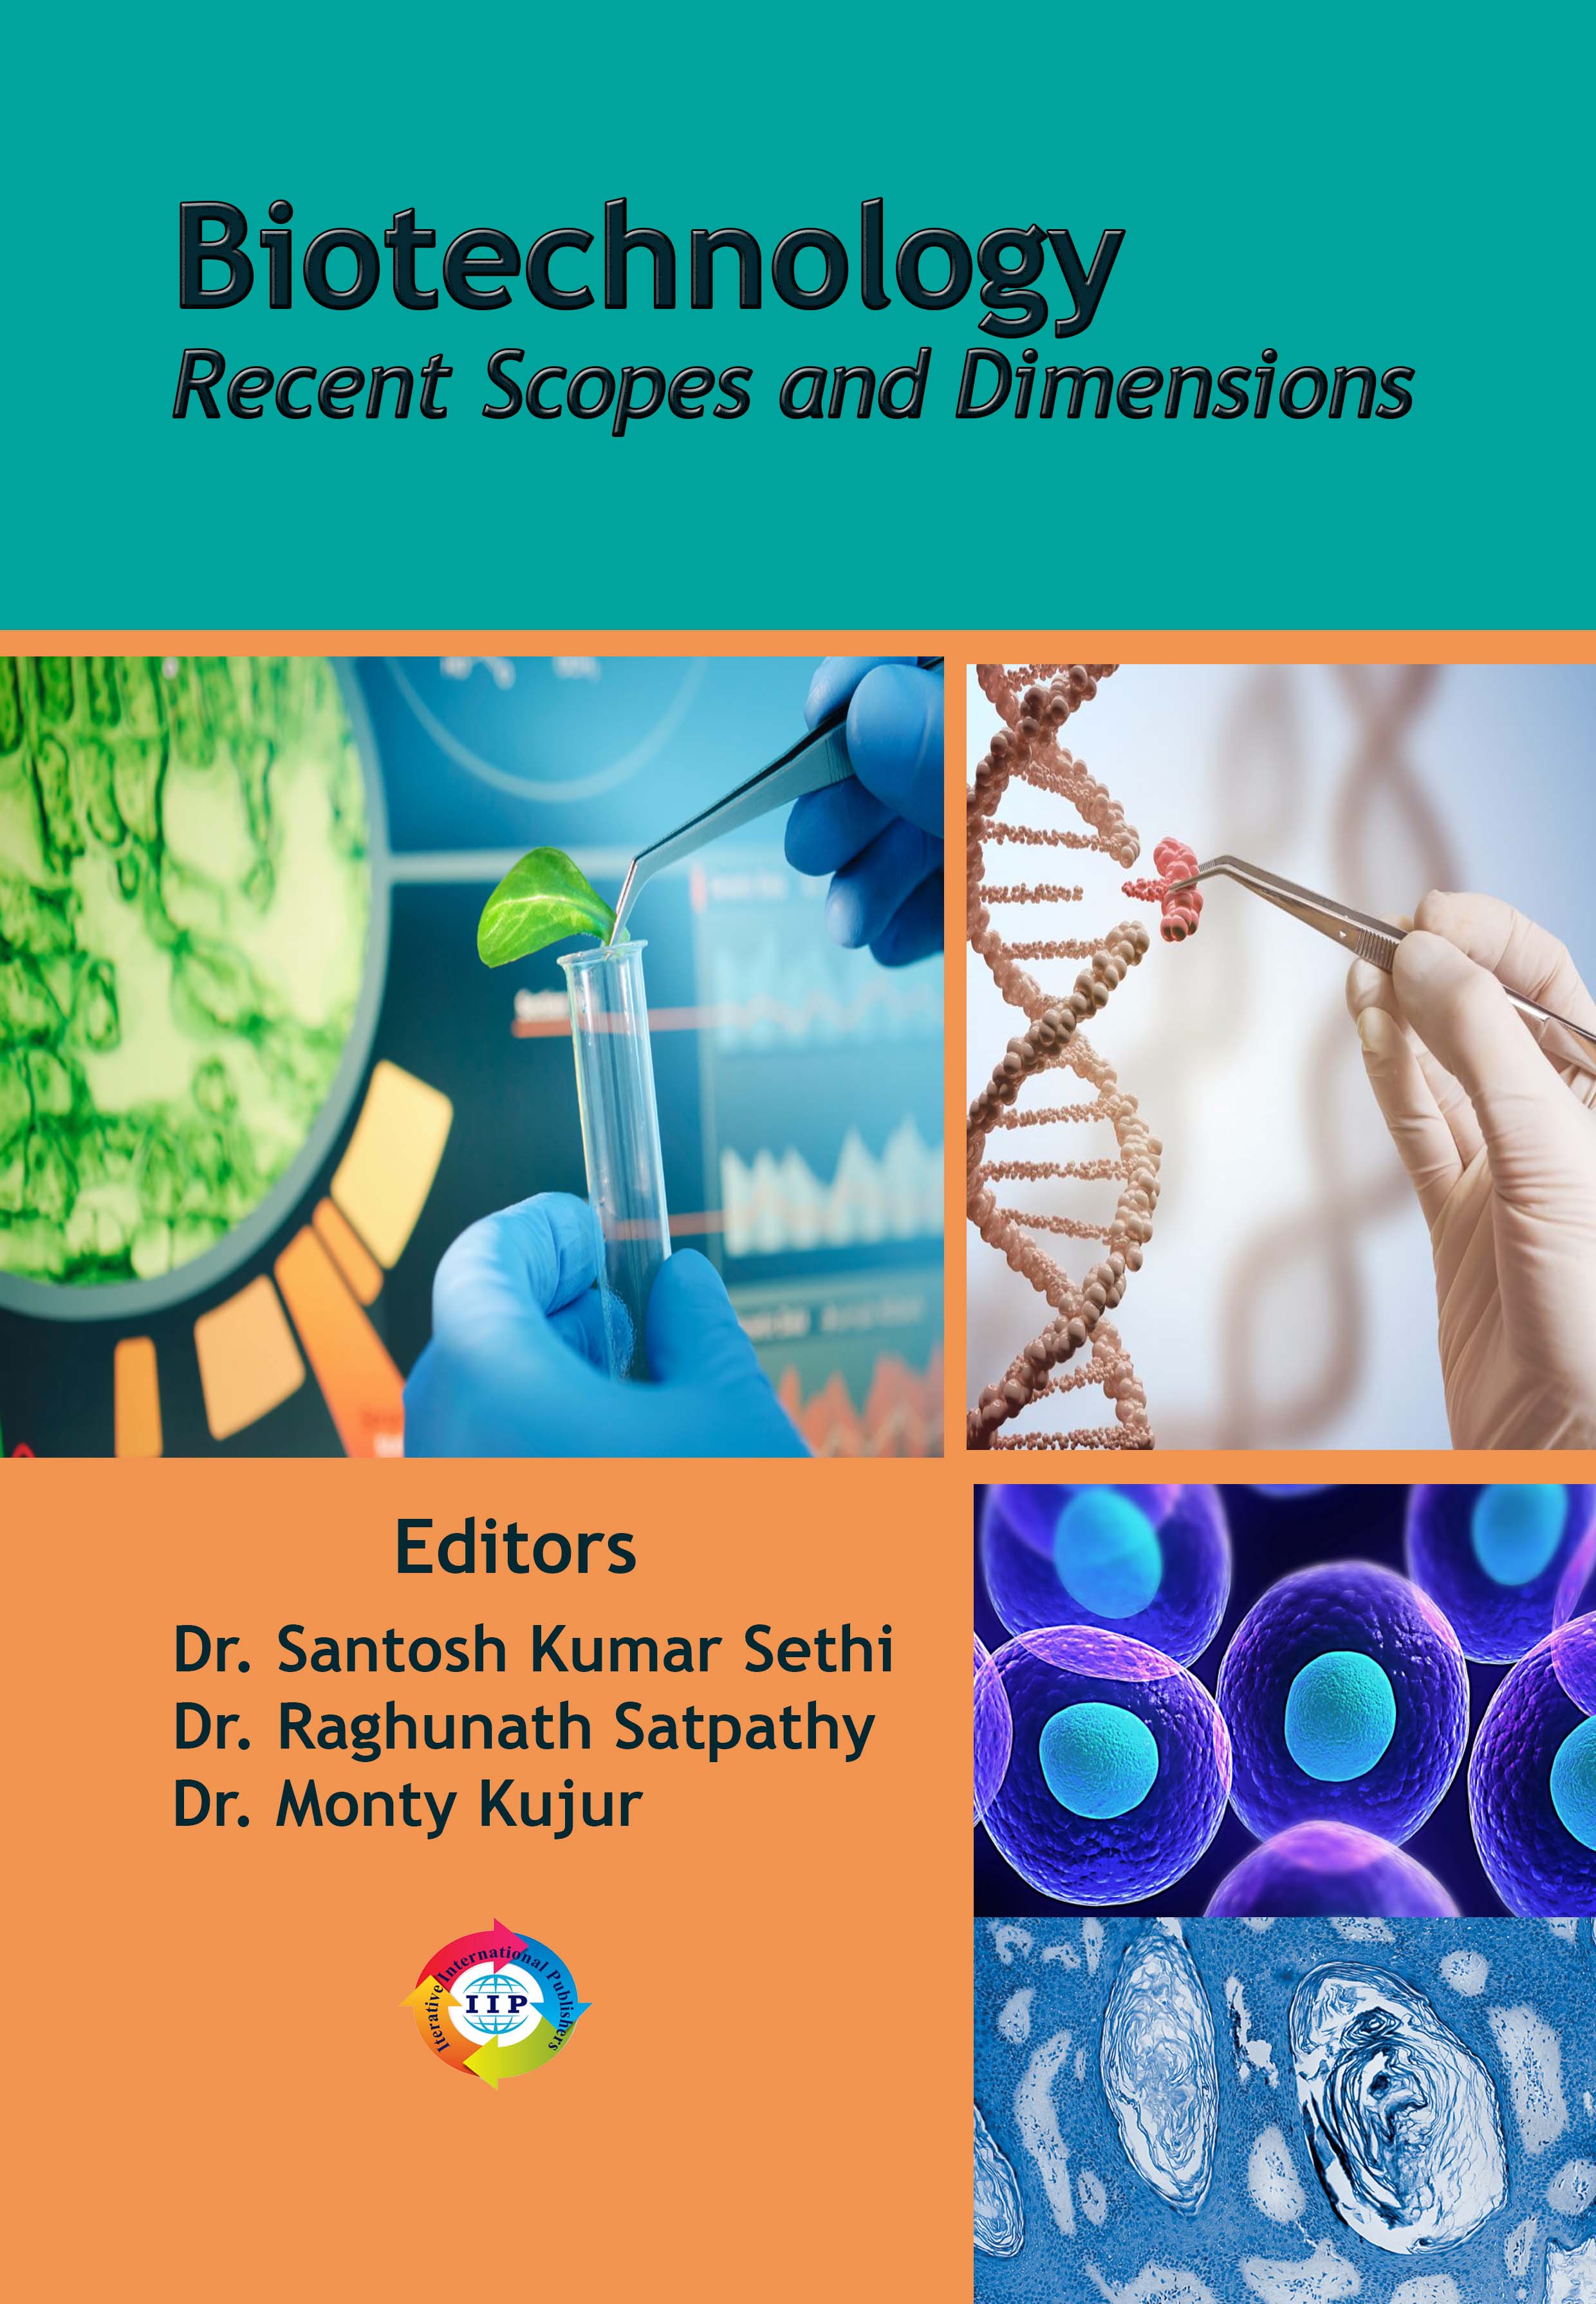 BIOTECHNOLOGY RECENT SCOPES AND DIMENSIONS